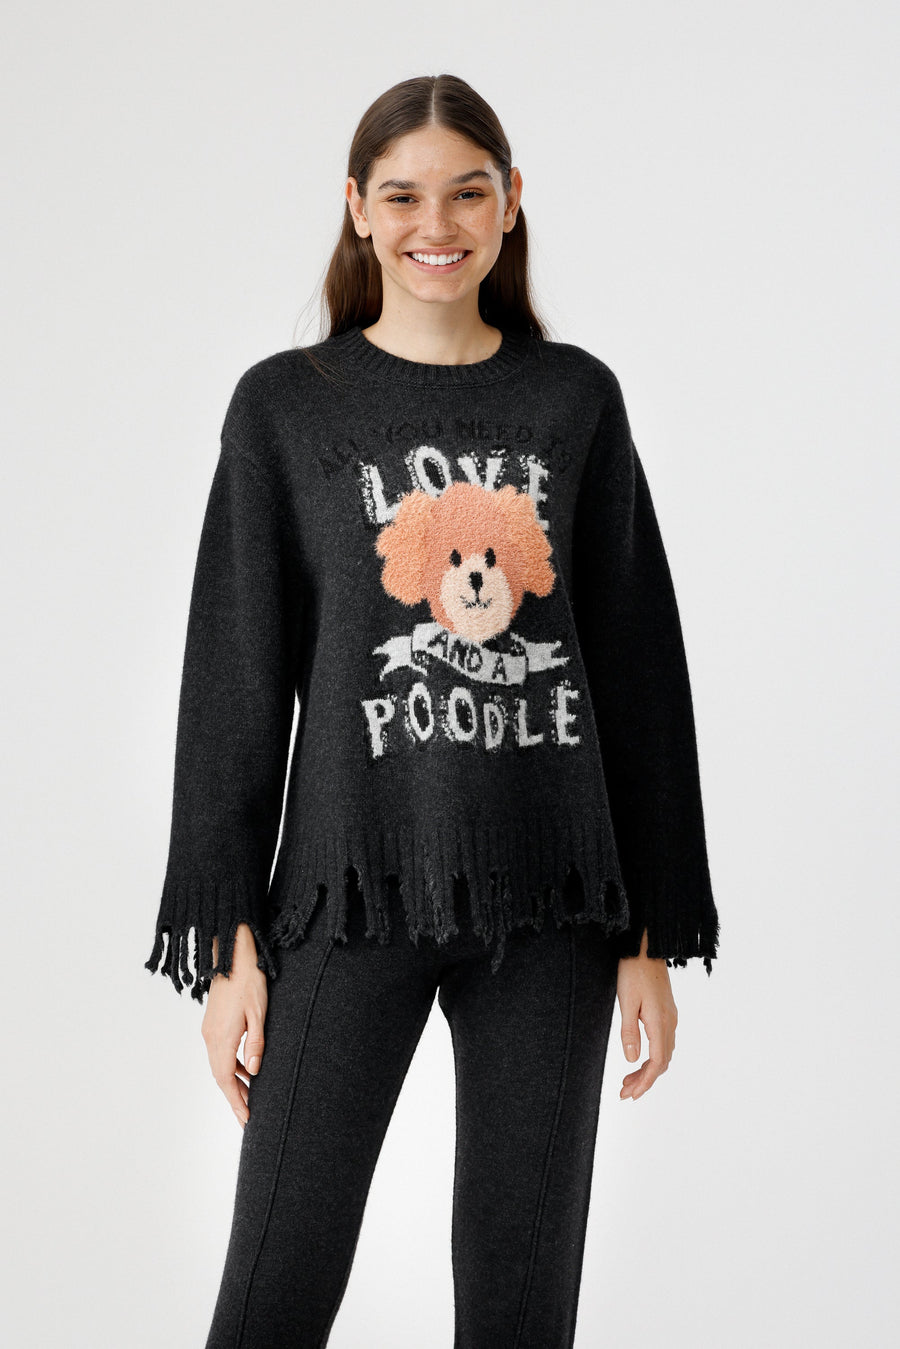 Poodle Bff Sweater